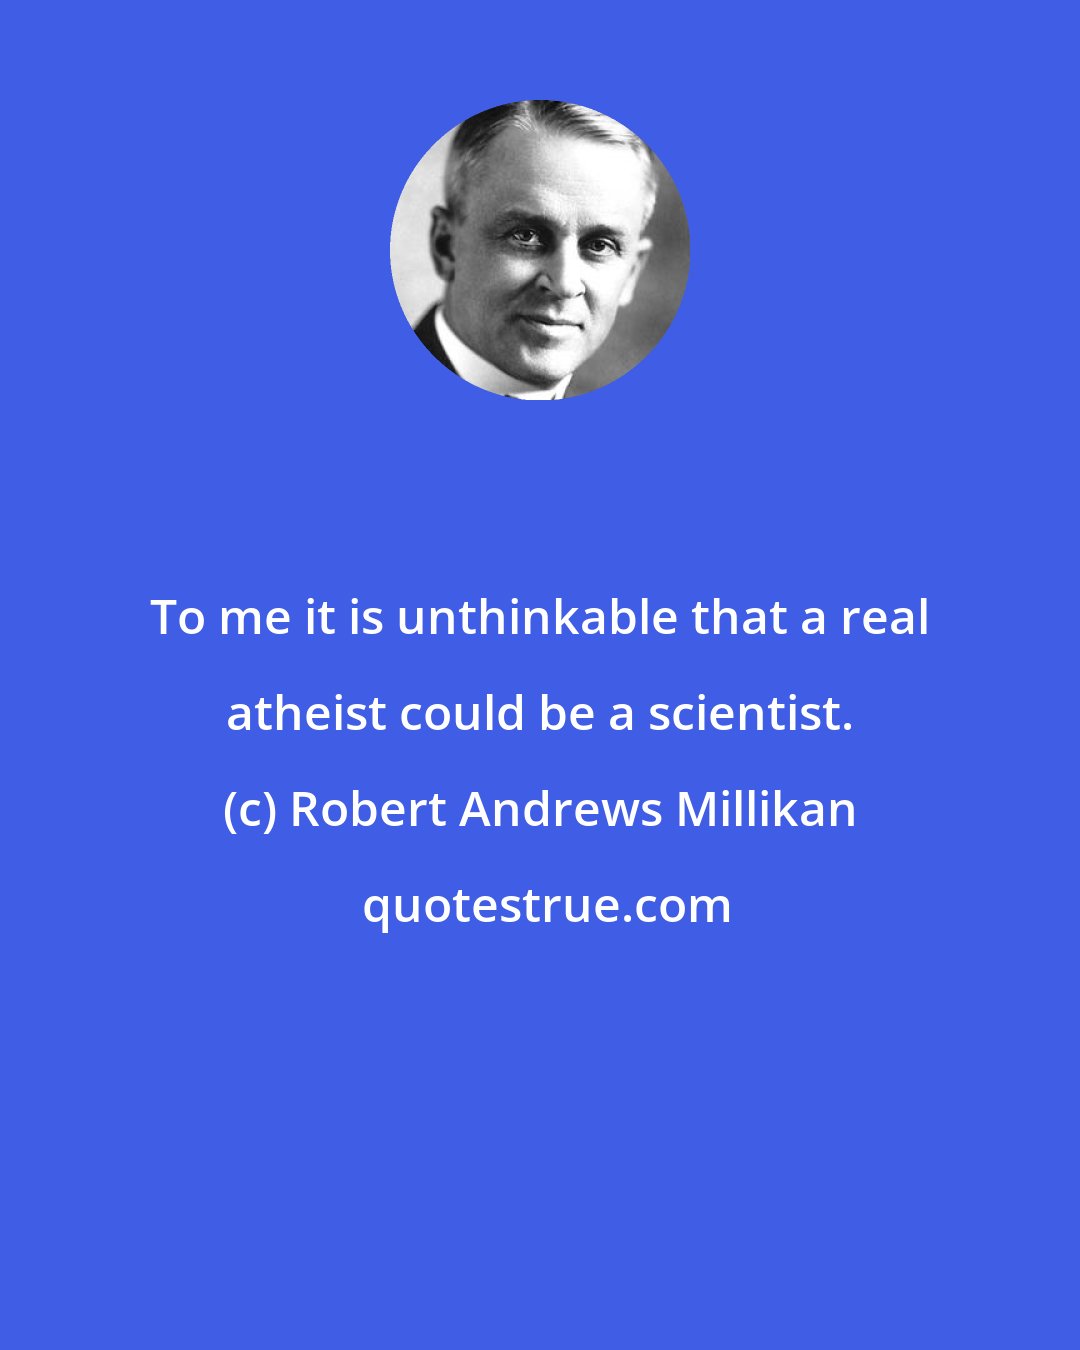 Robert Andrews Millikan: To me it is unthinkable that a real atheist could be a scientist.